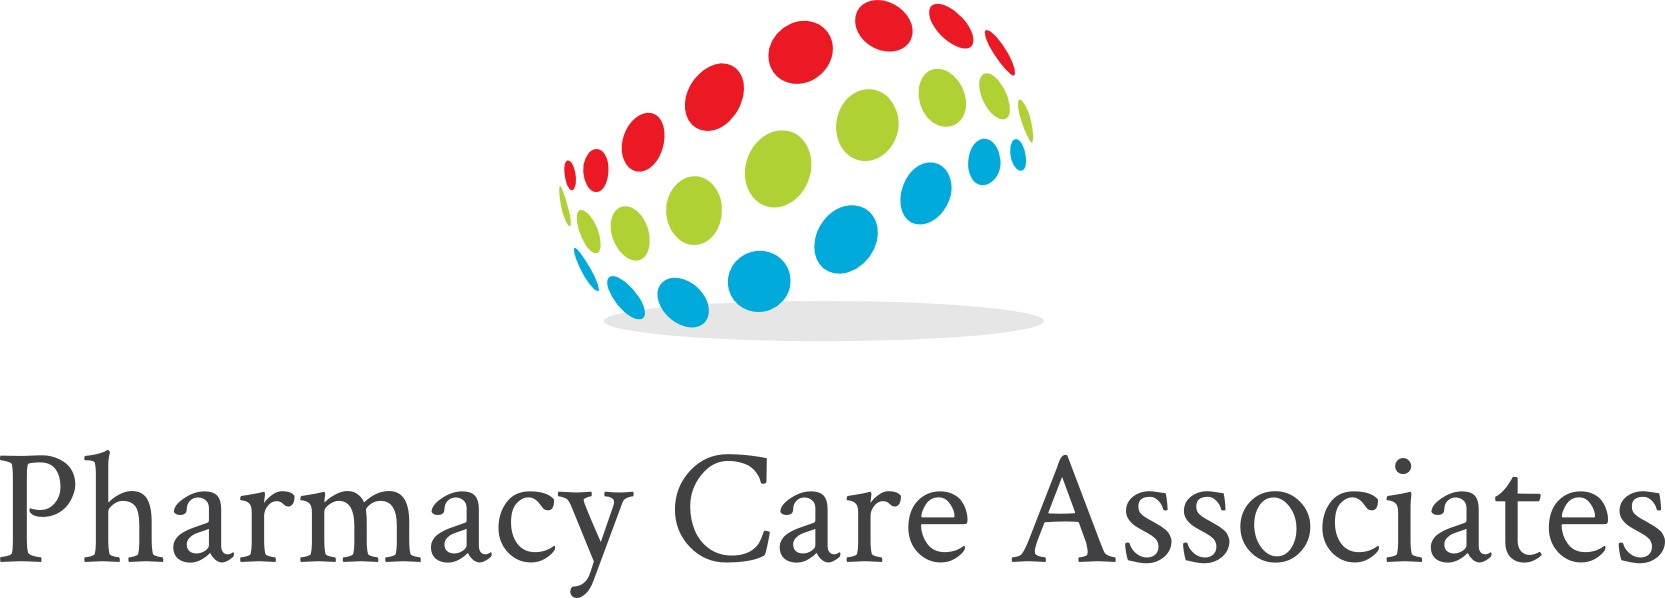 5. Pharmacy Care Associates (Supporting)